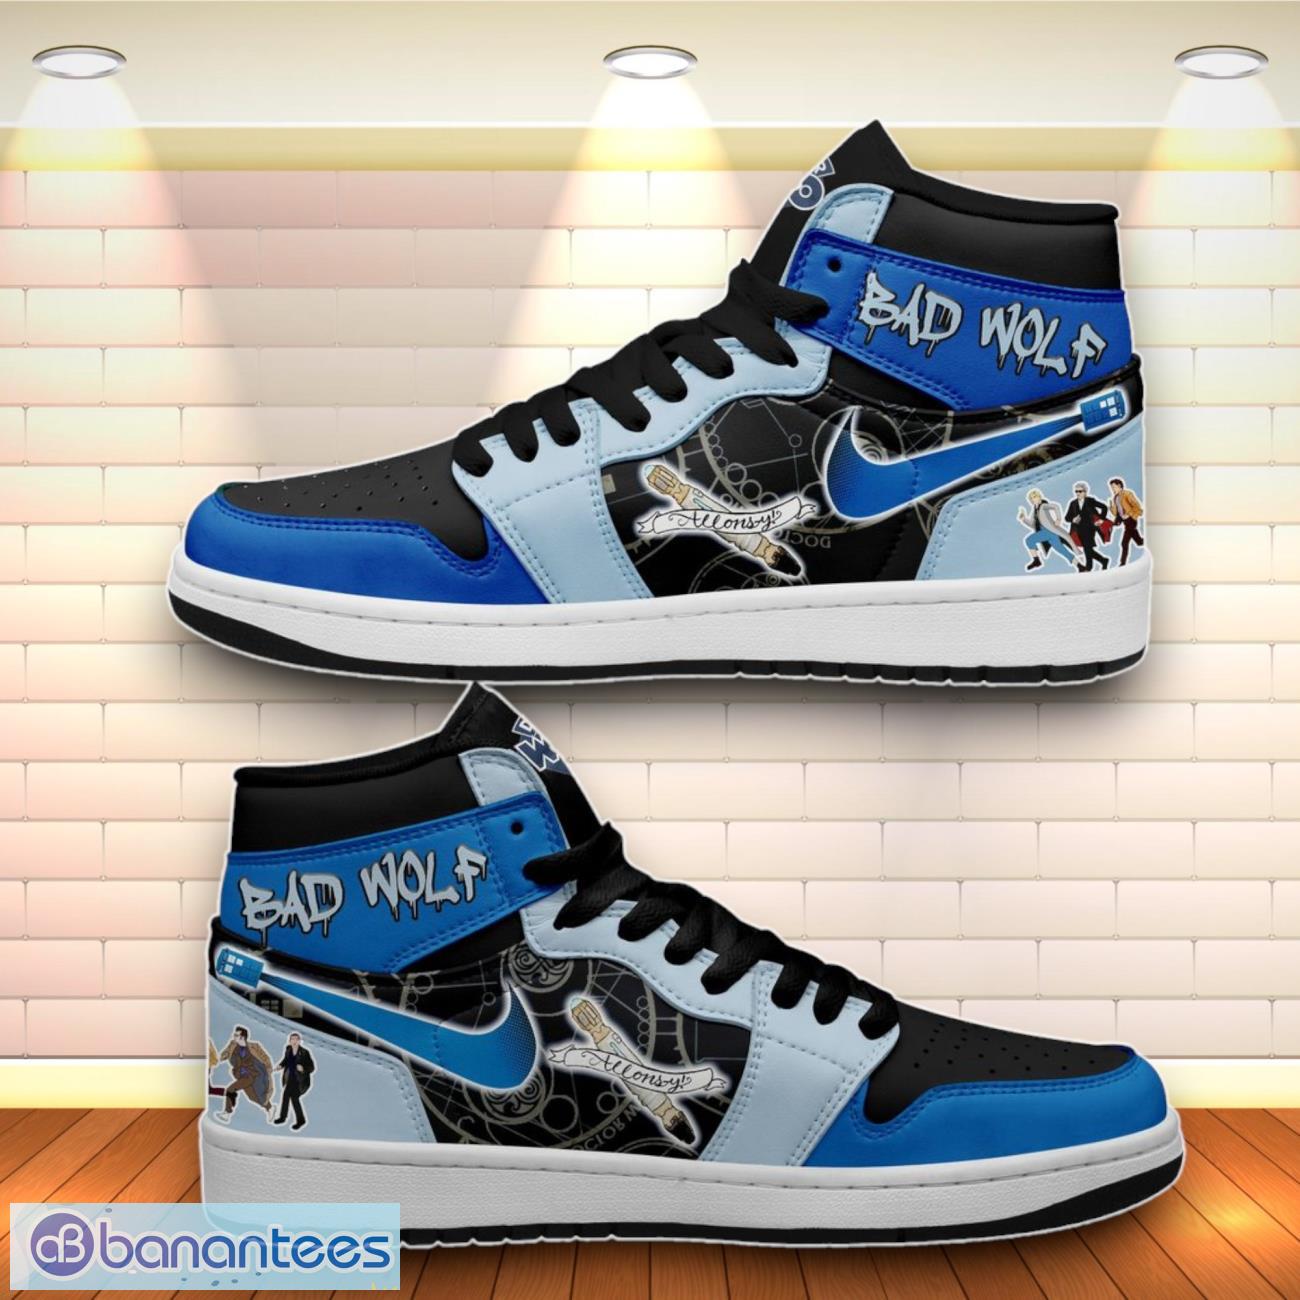 Doctor Who Bad Wolf Air Jordan High Top Shoes Product Photo 1